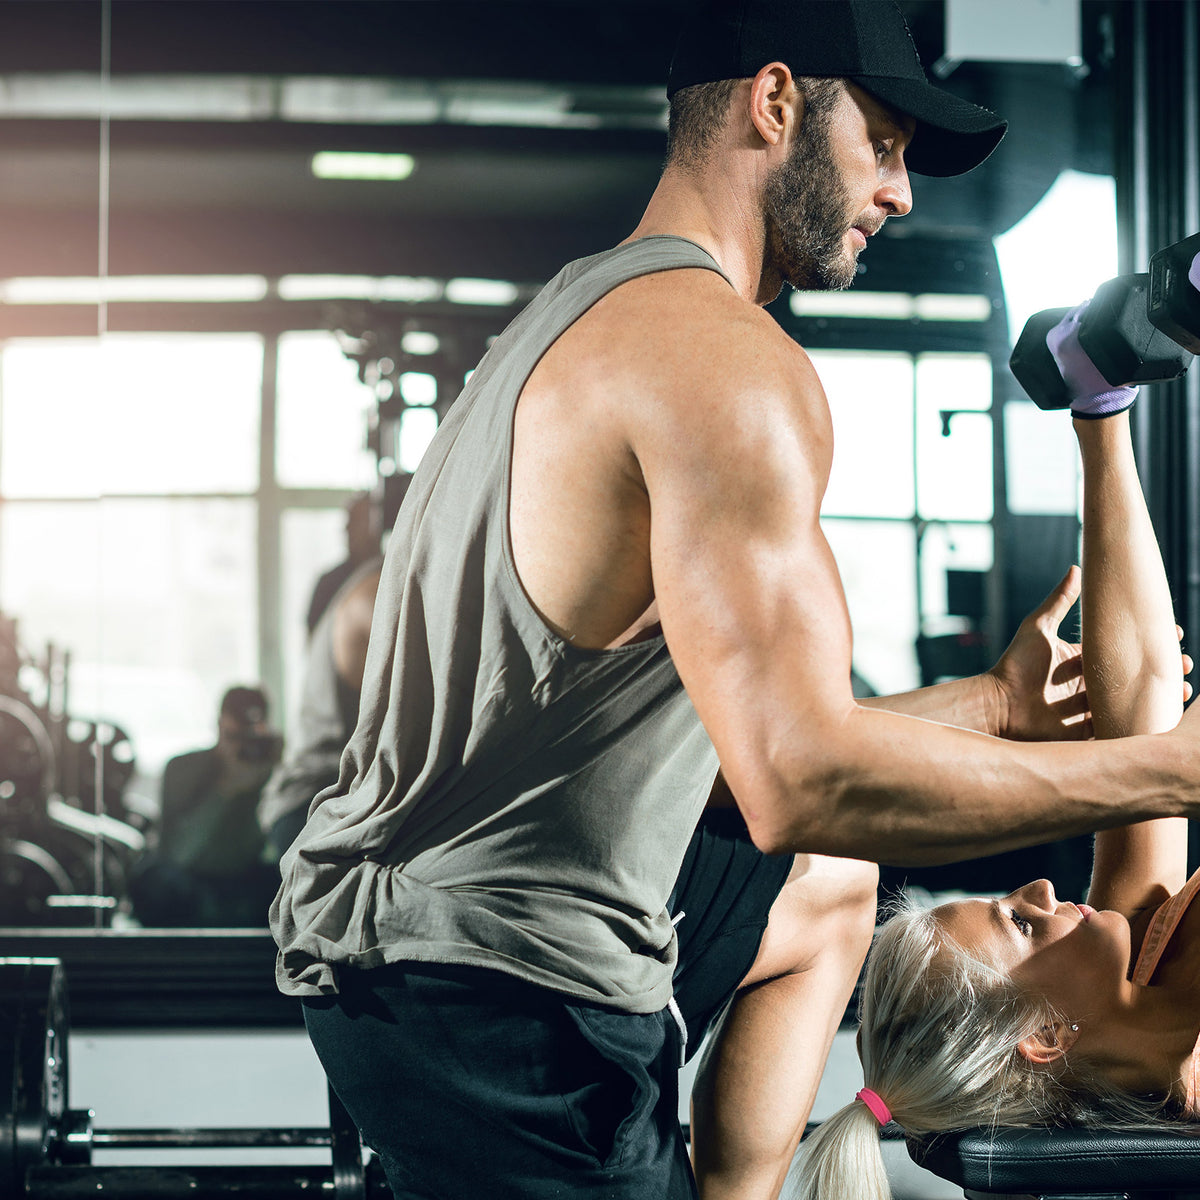 Benefits of Neutral-Grip Dumbbell Bench Presses